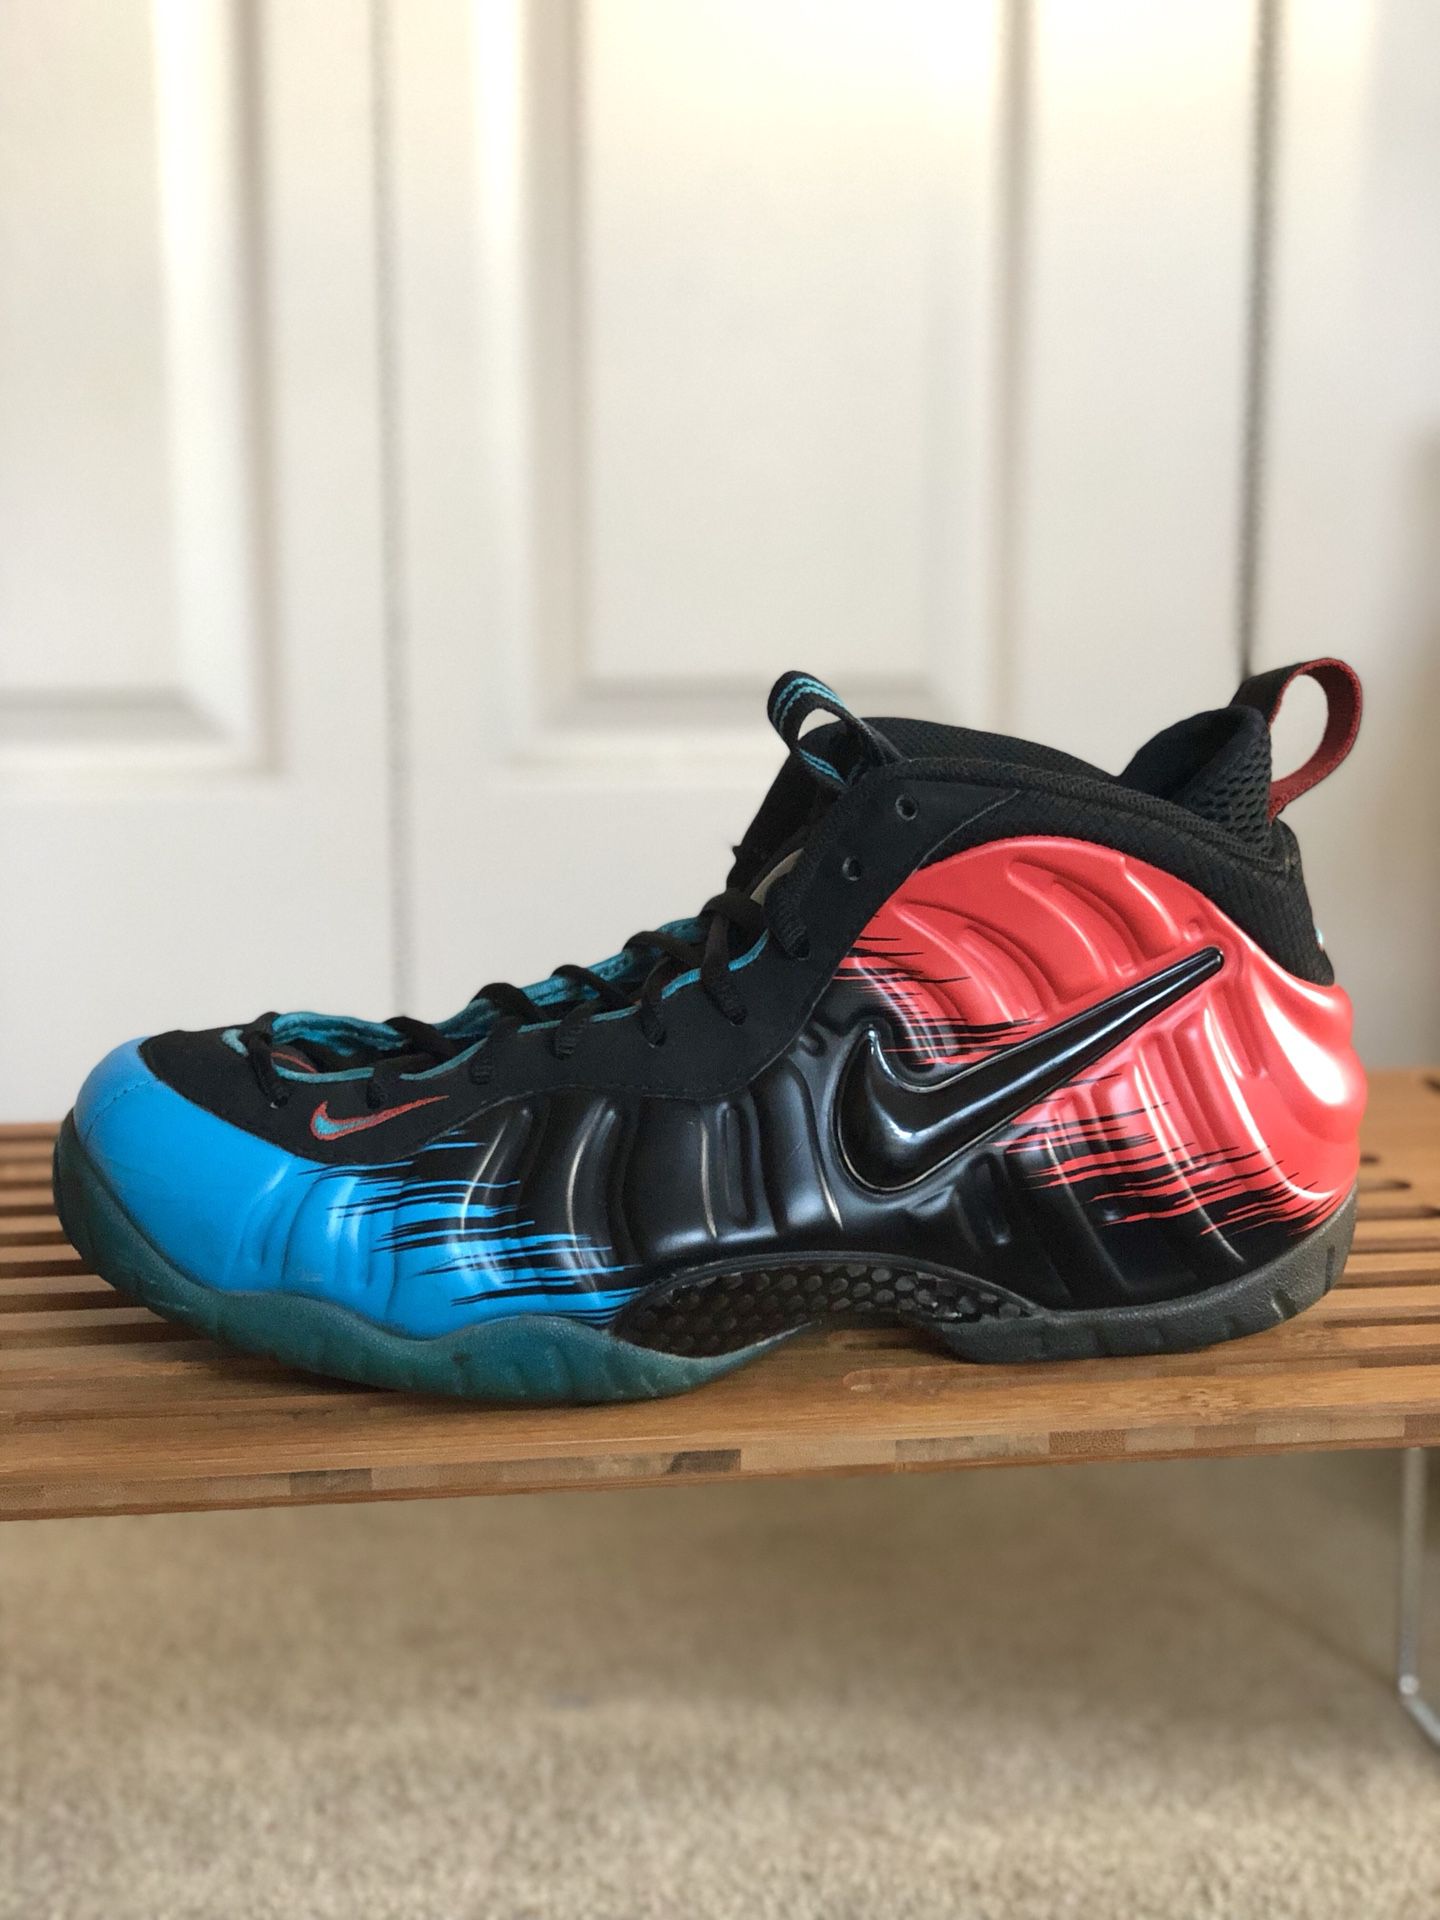 NIKE Air Foamposite Pro “SPIDERMAN” (2014) - Size 9.5 for Sale in